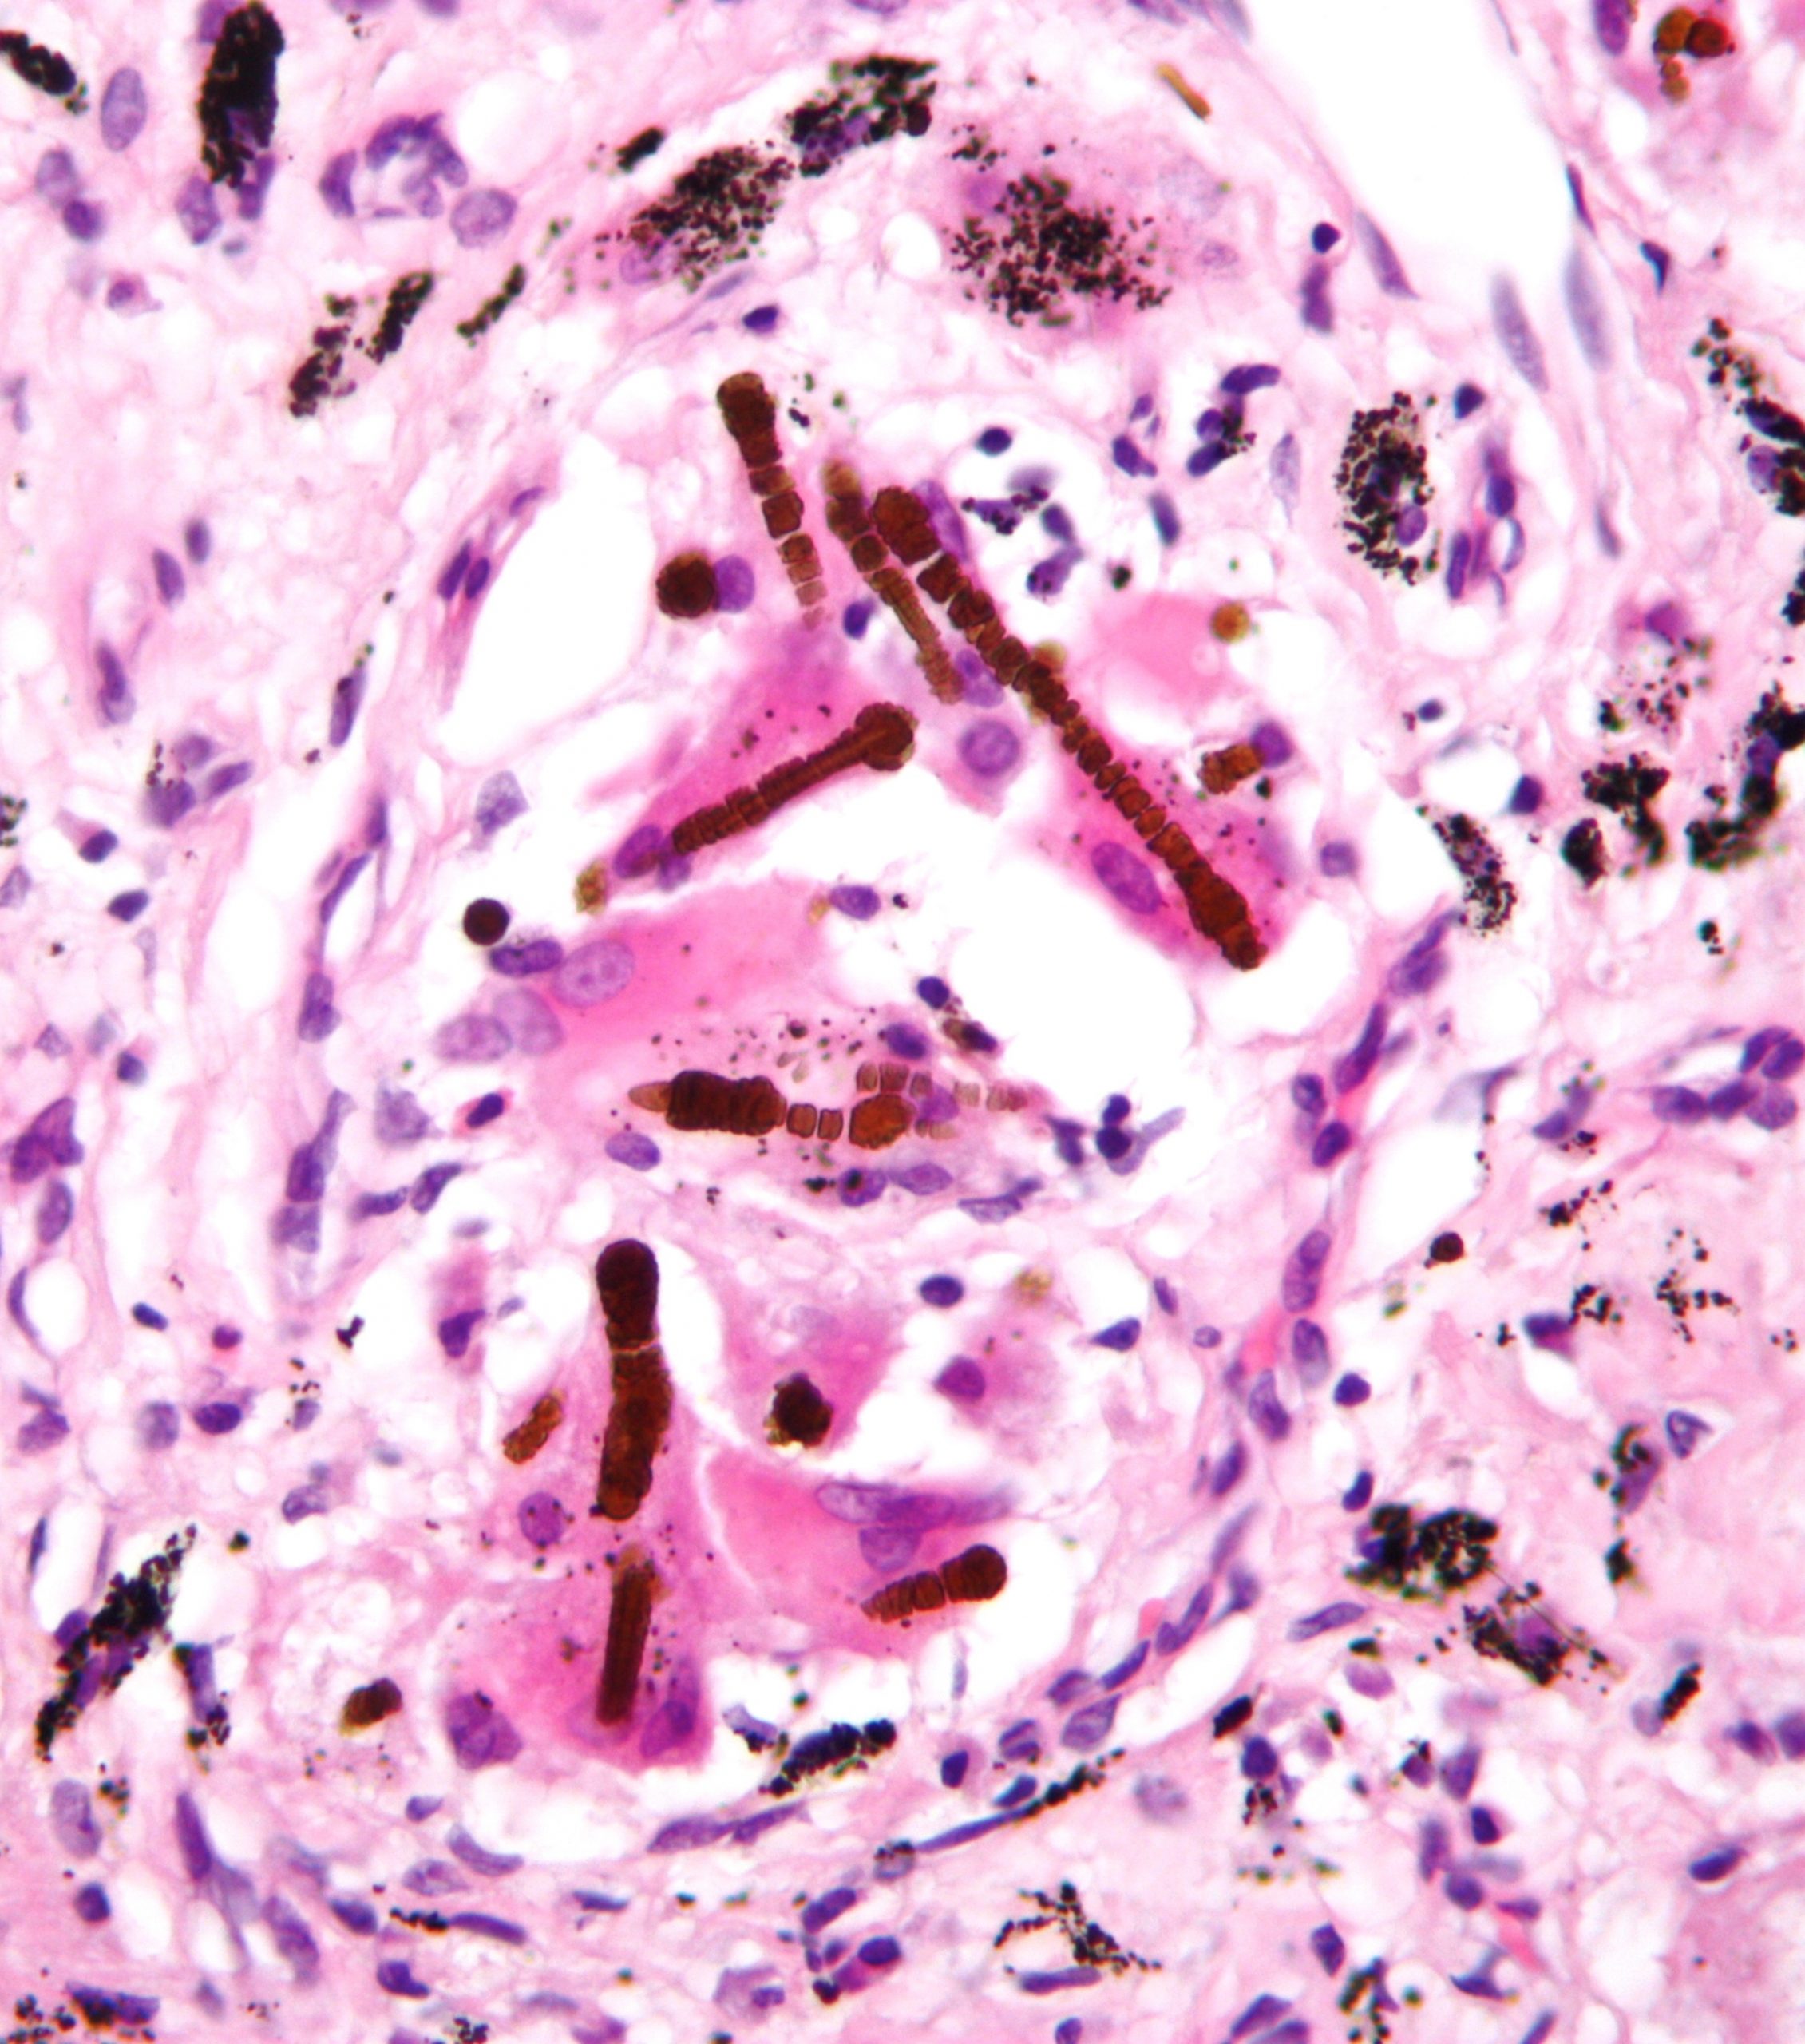 Histological slide of lung tissue shows darkly stained elongated pole like particles embedded in lung parenchyma